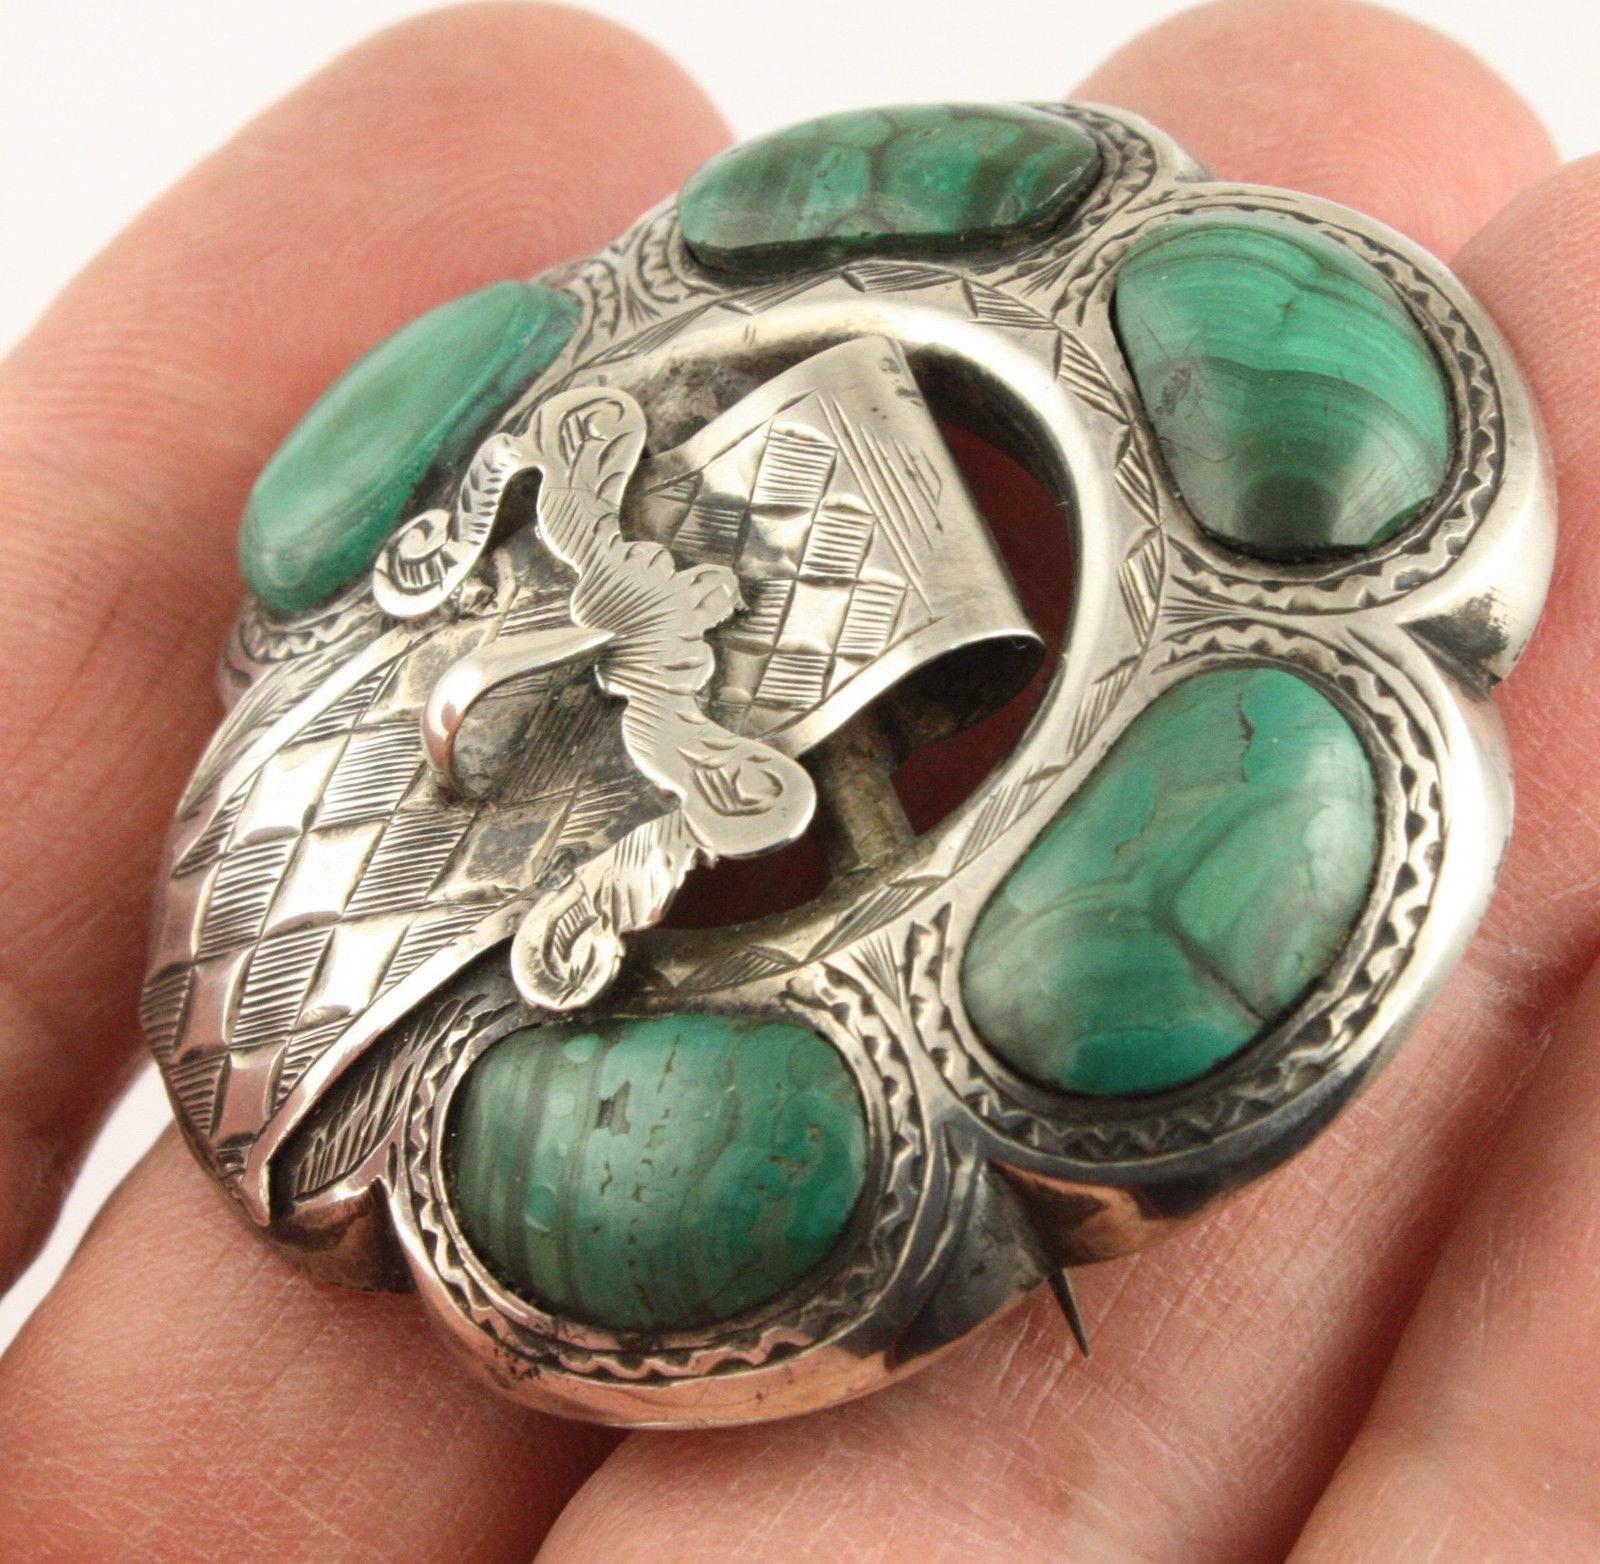 Stunning large Victorian Antique Malachite Sterling Silver Scottish Garter Brooch Circa 1890; C clasp and pin are in excellent working condition; fully tested and is sterling silver. During Queen Victoria’s reign Scottish craftsmen used many